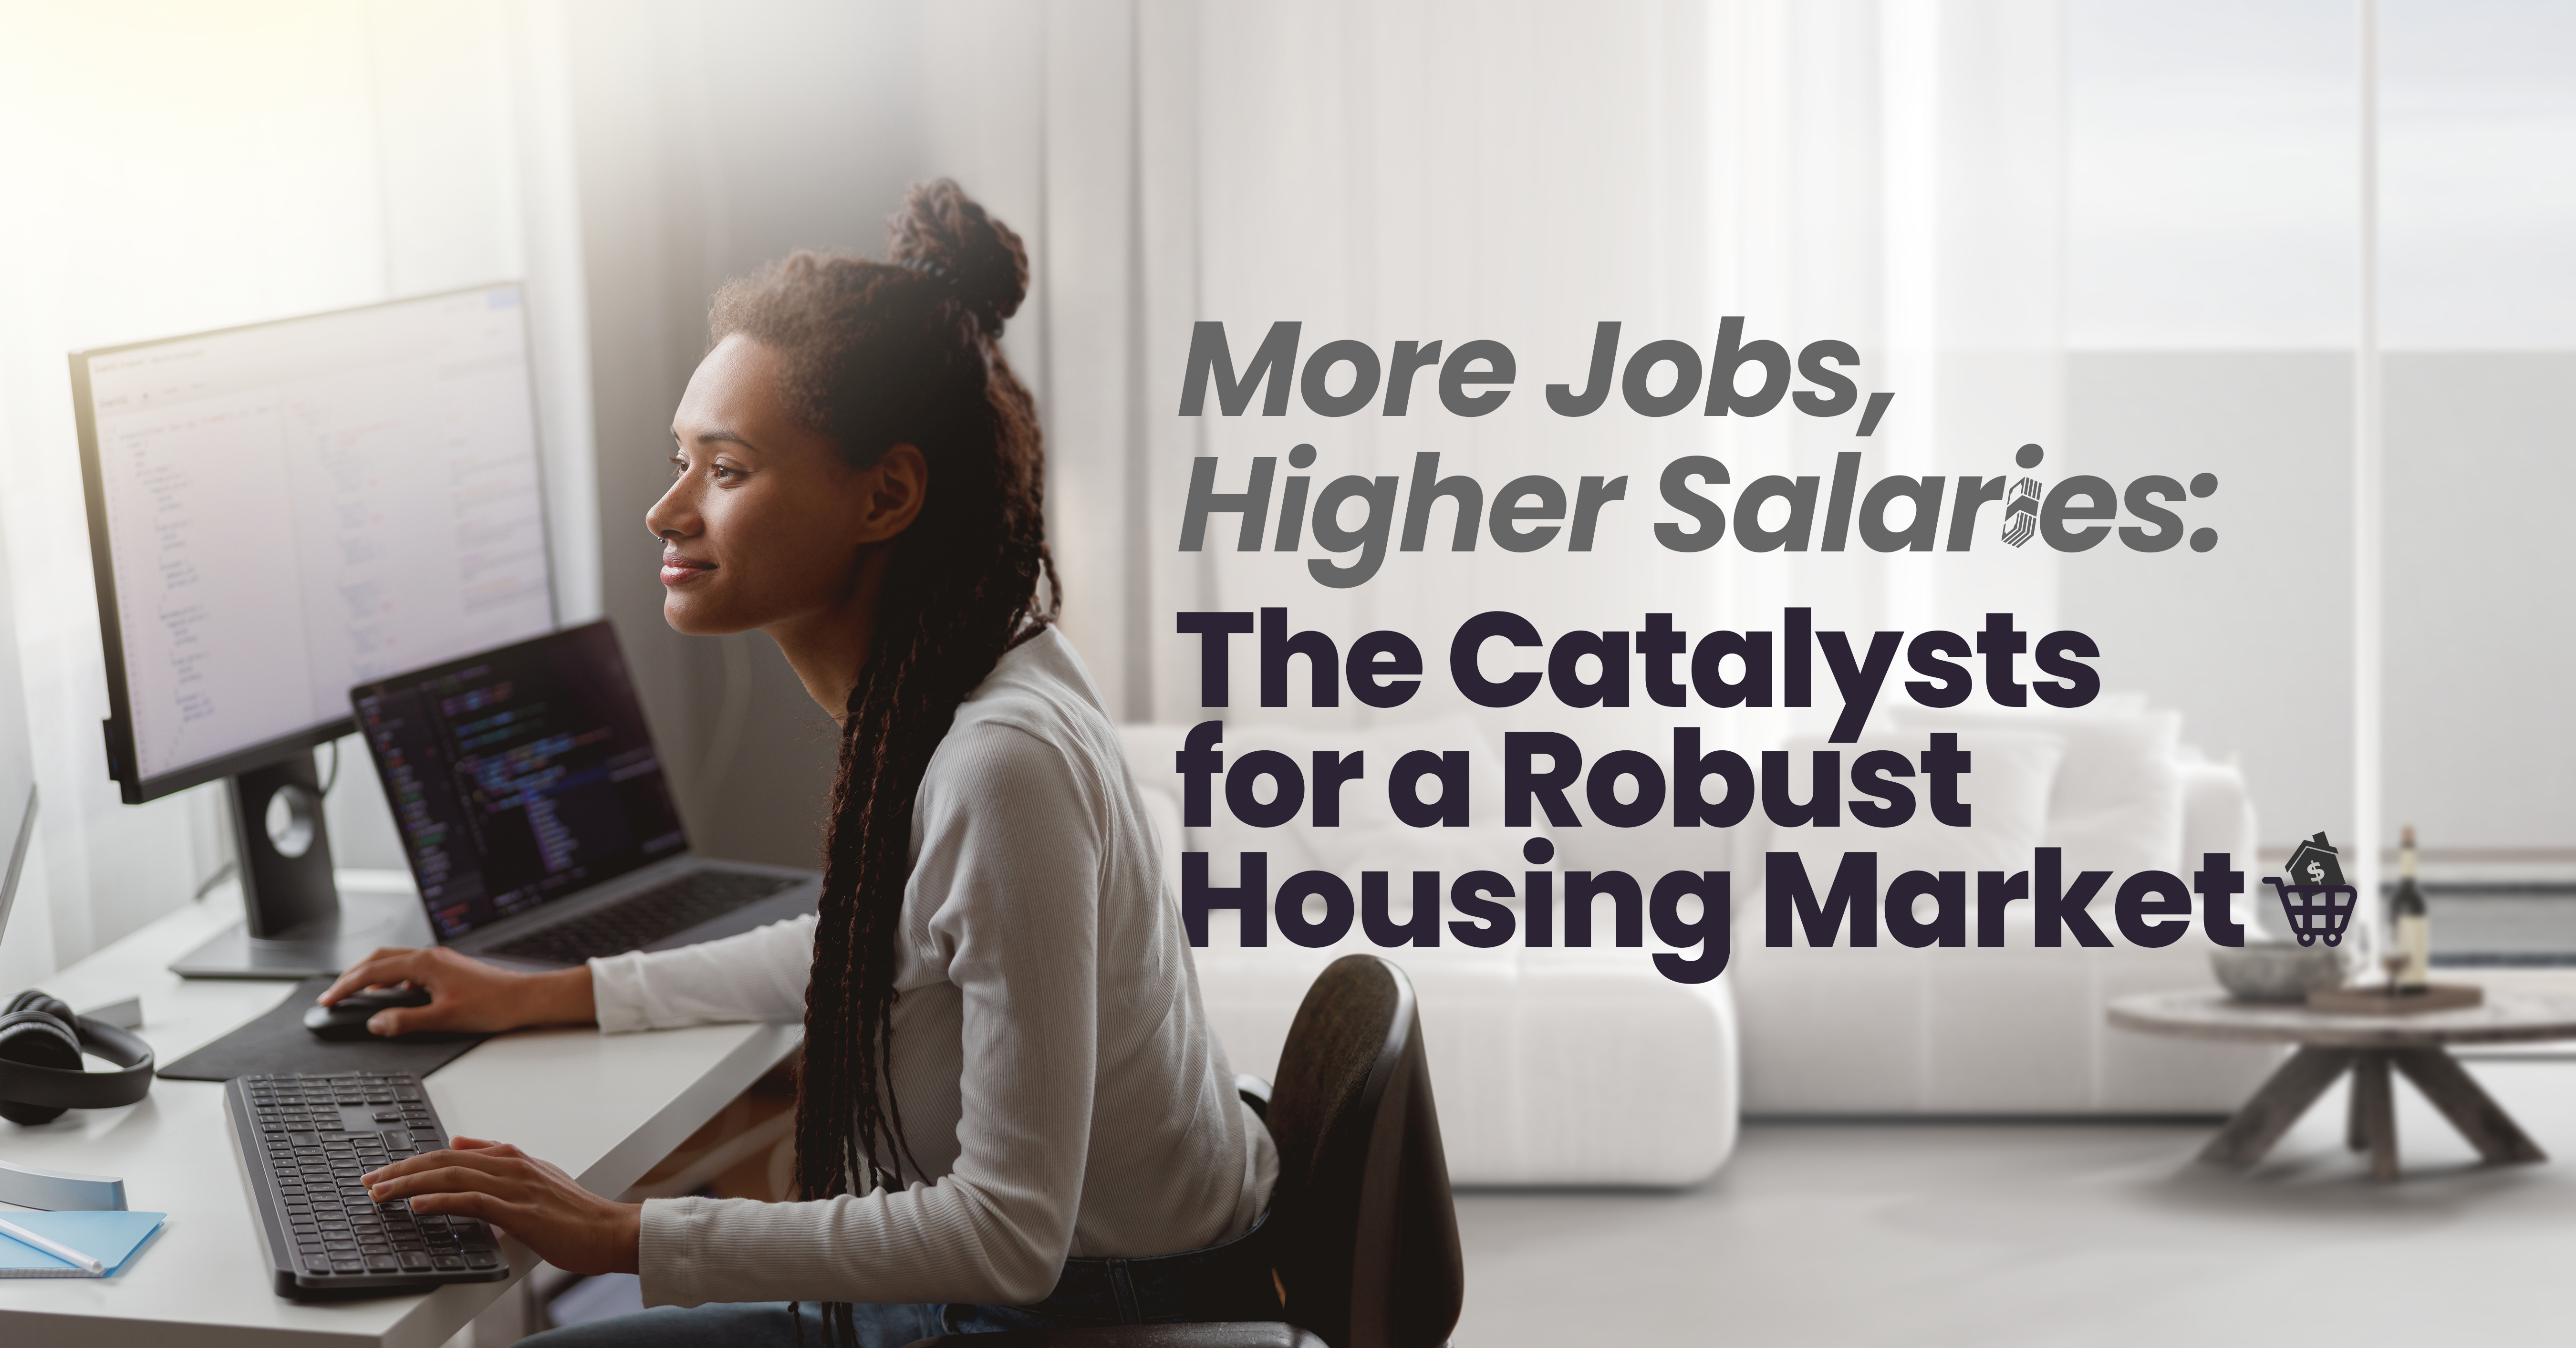 The Impact of Job Growth and Rising Salaries on Housing Demand